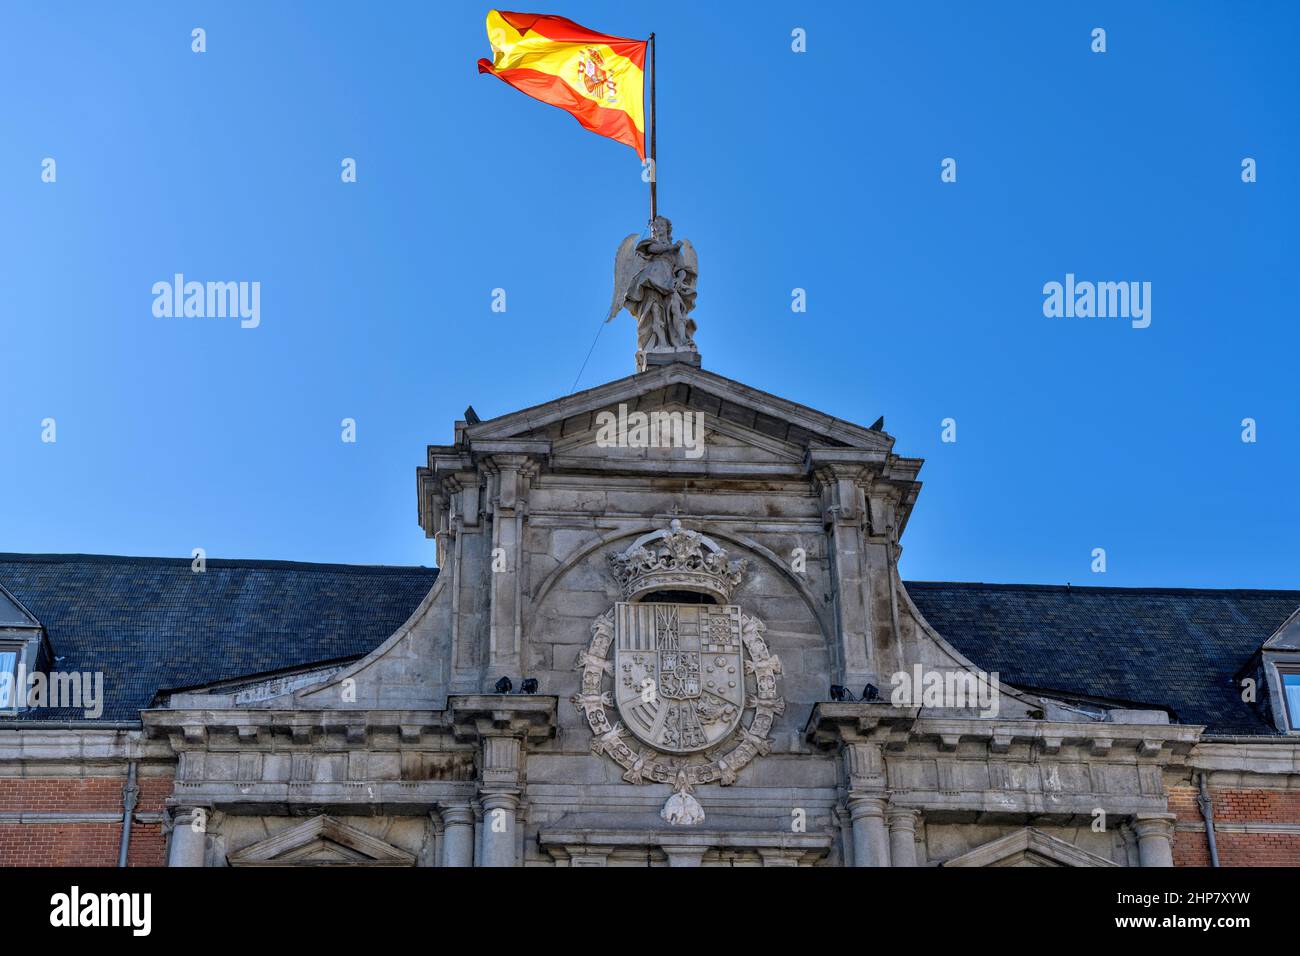 Santa Cruz Palace - Closeup morning view of a Spanish National Flag flying at top of 17th-century Palace of the Holy Cross. Madrid, Spain. Stock Photo